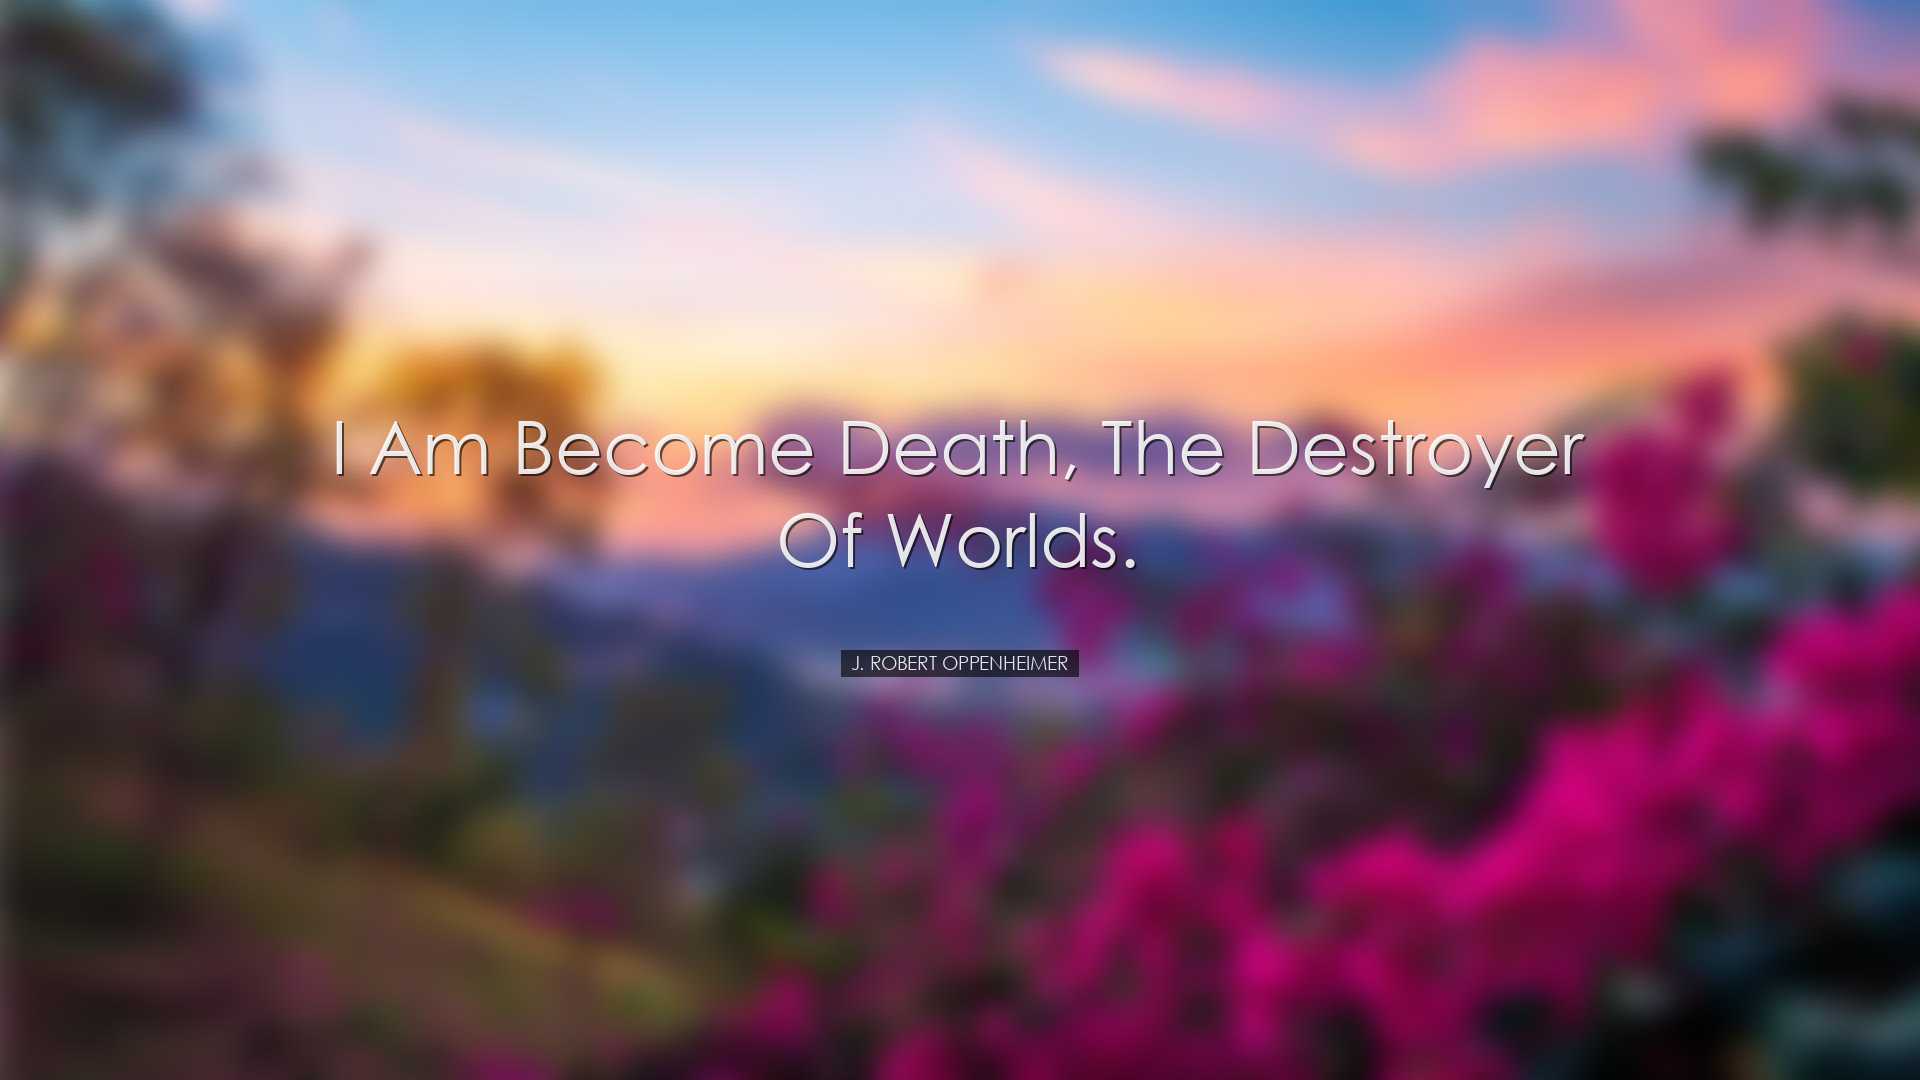 I am become death, the destroyer of worlds. - J. Robert Oppenheime